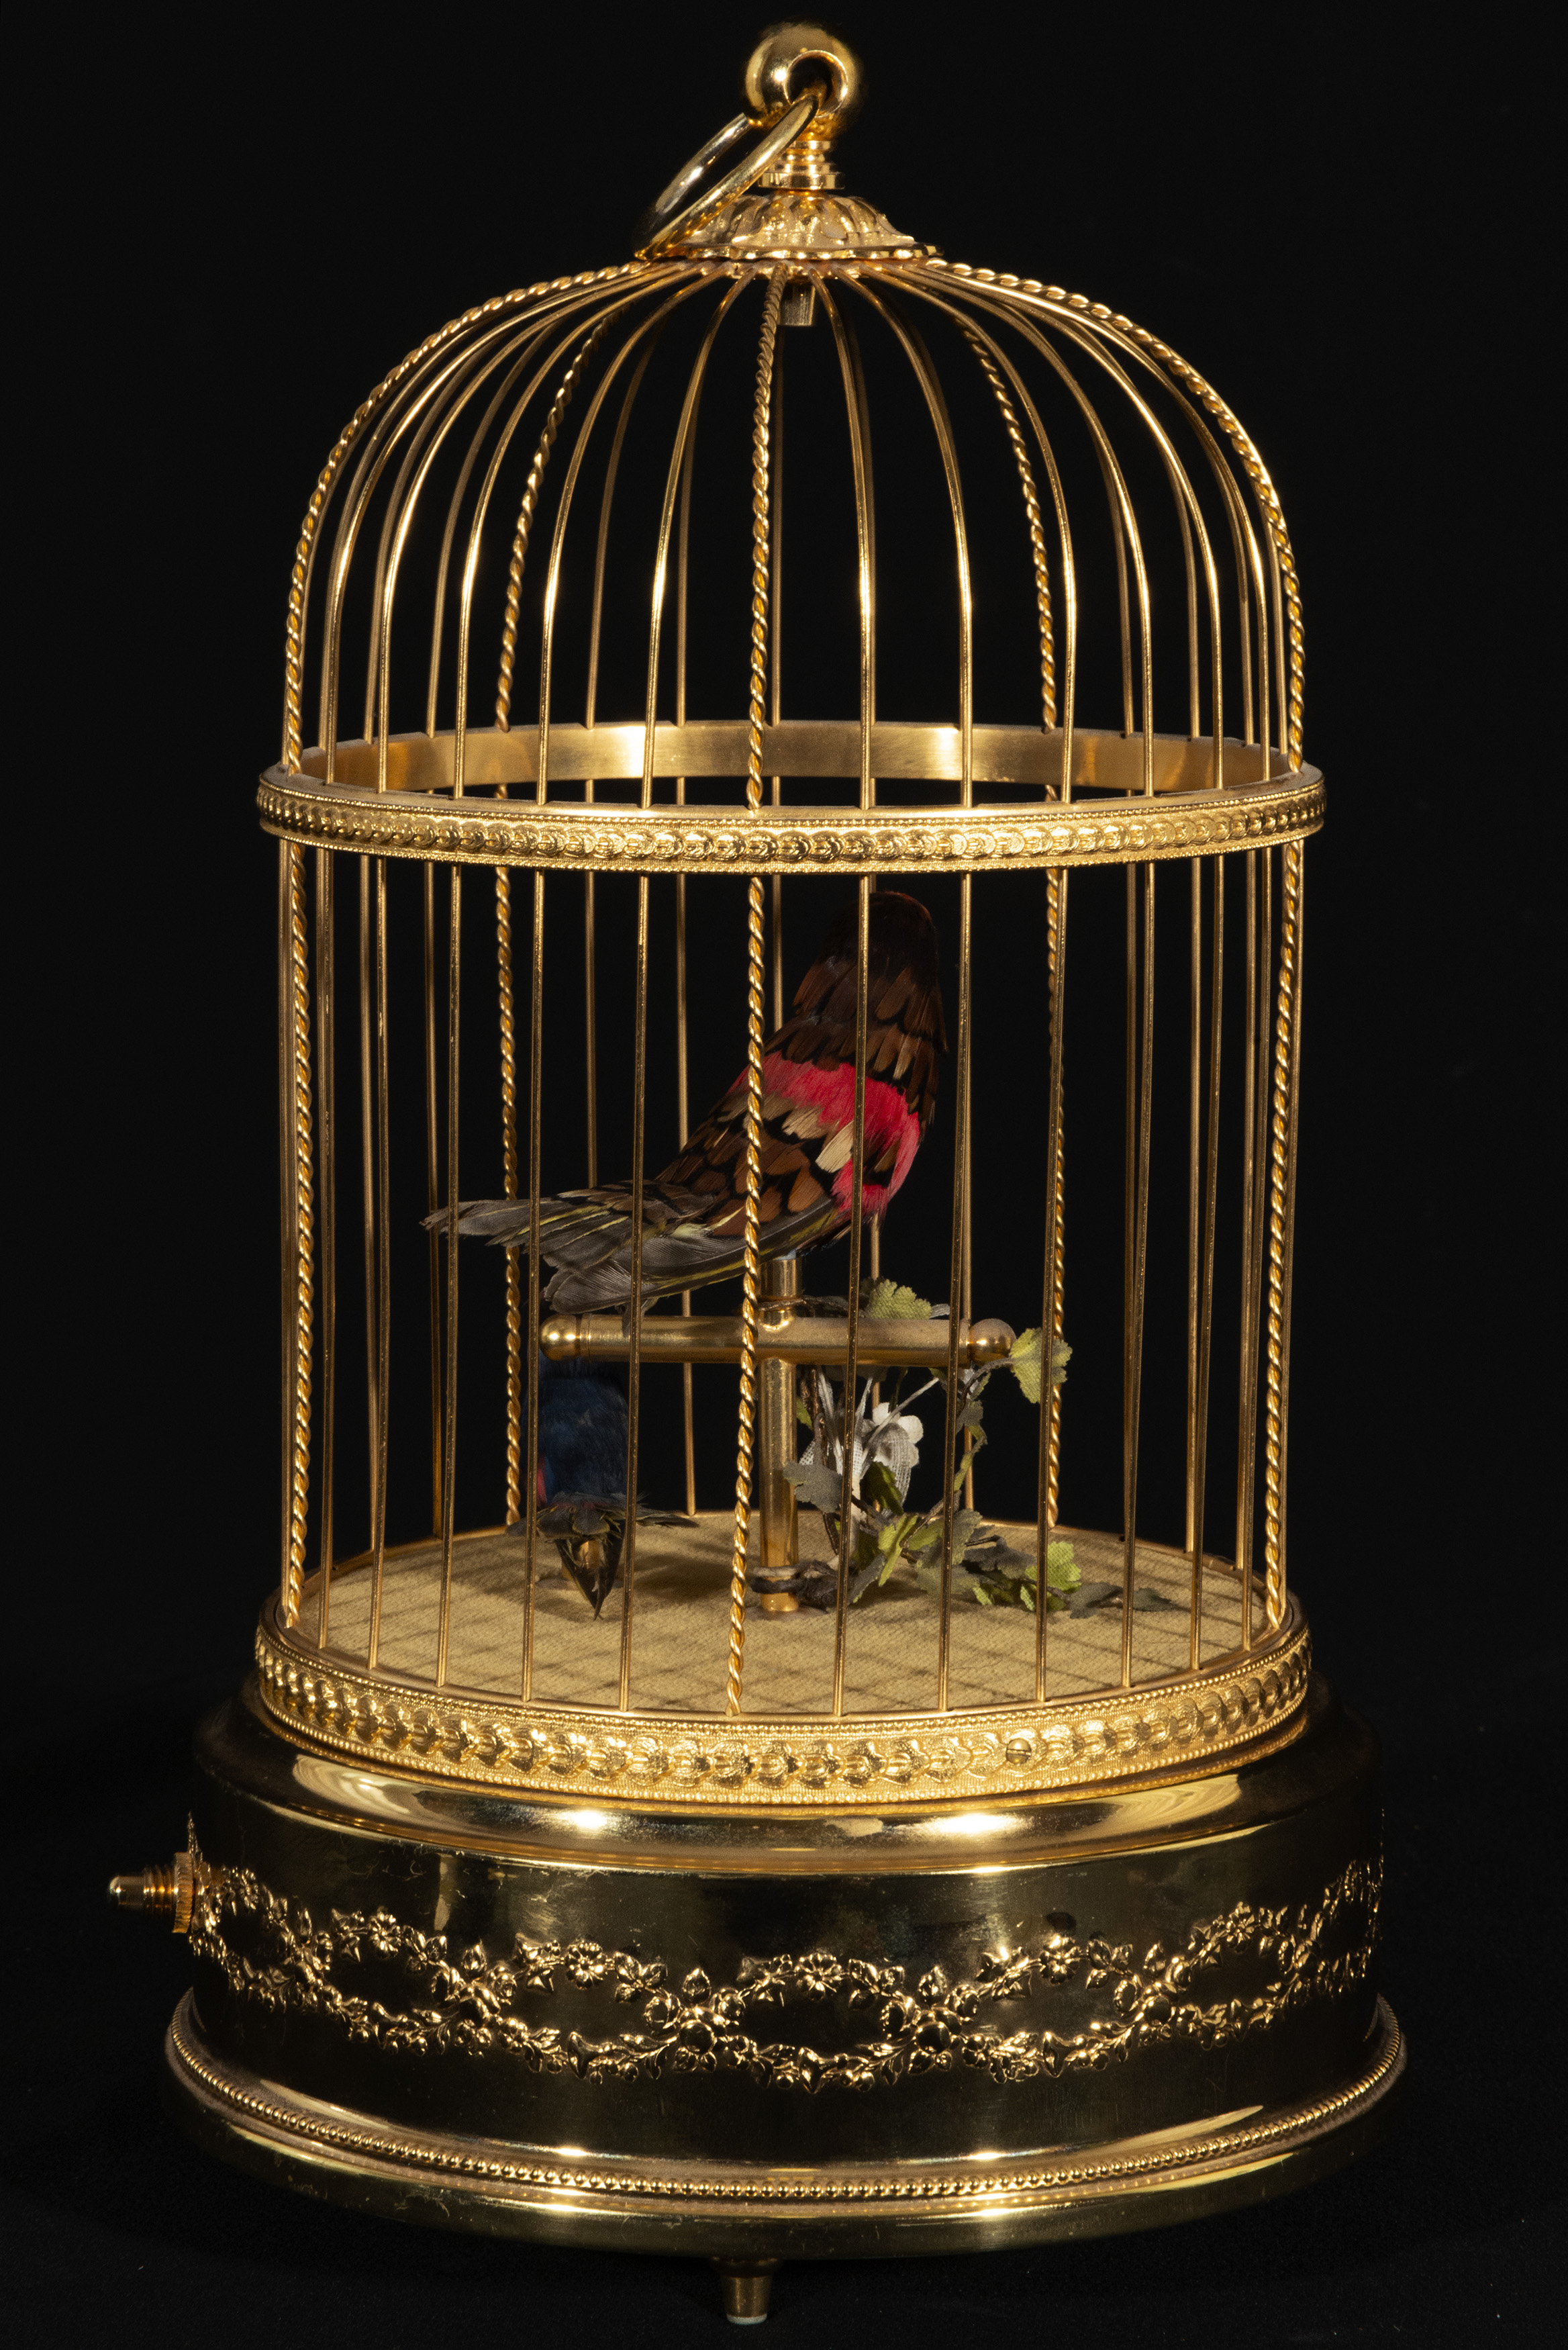 Automaton clock cage with songbird from the 20th century, Germany - Image 2 of 6